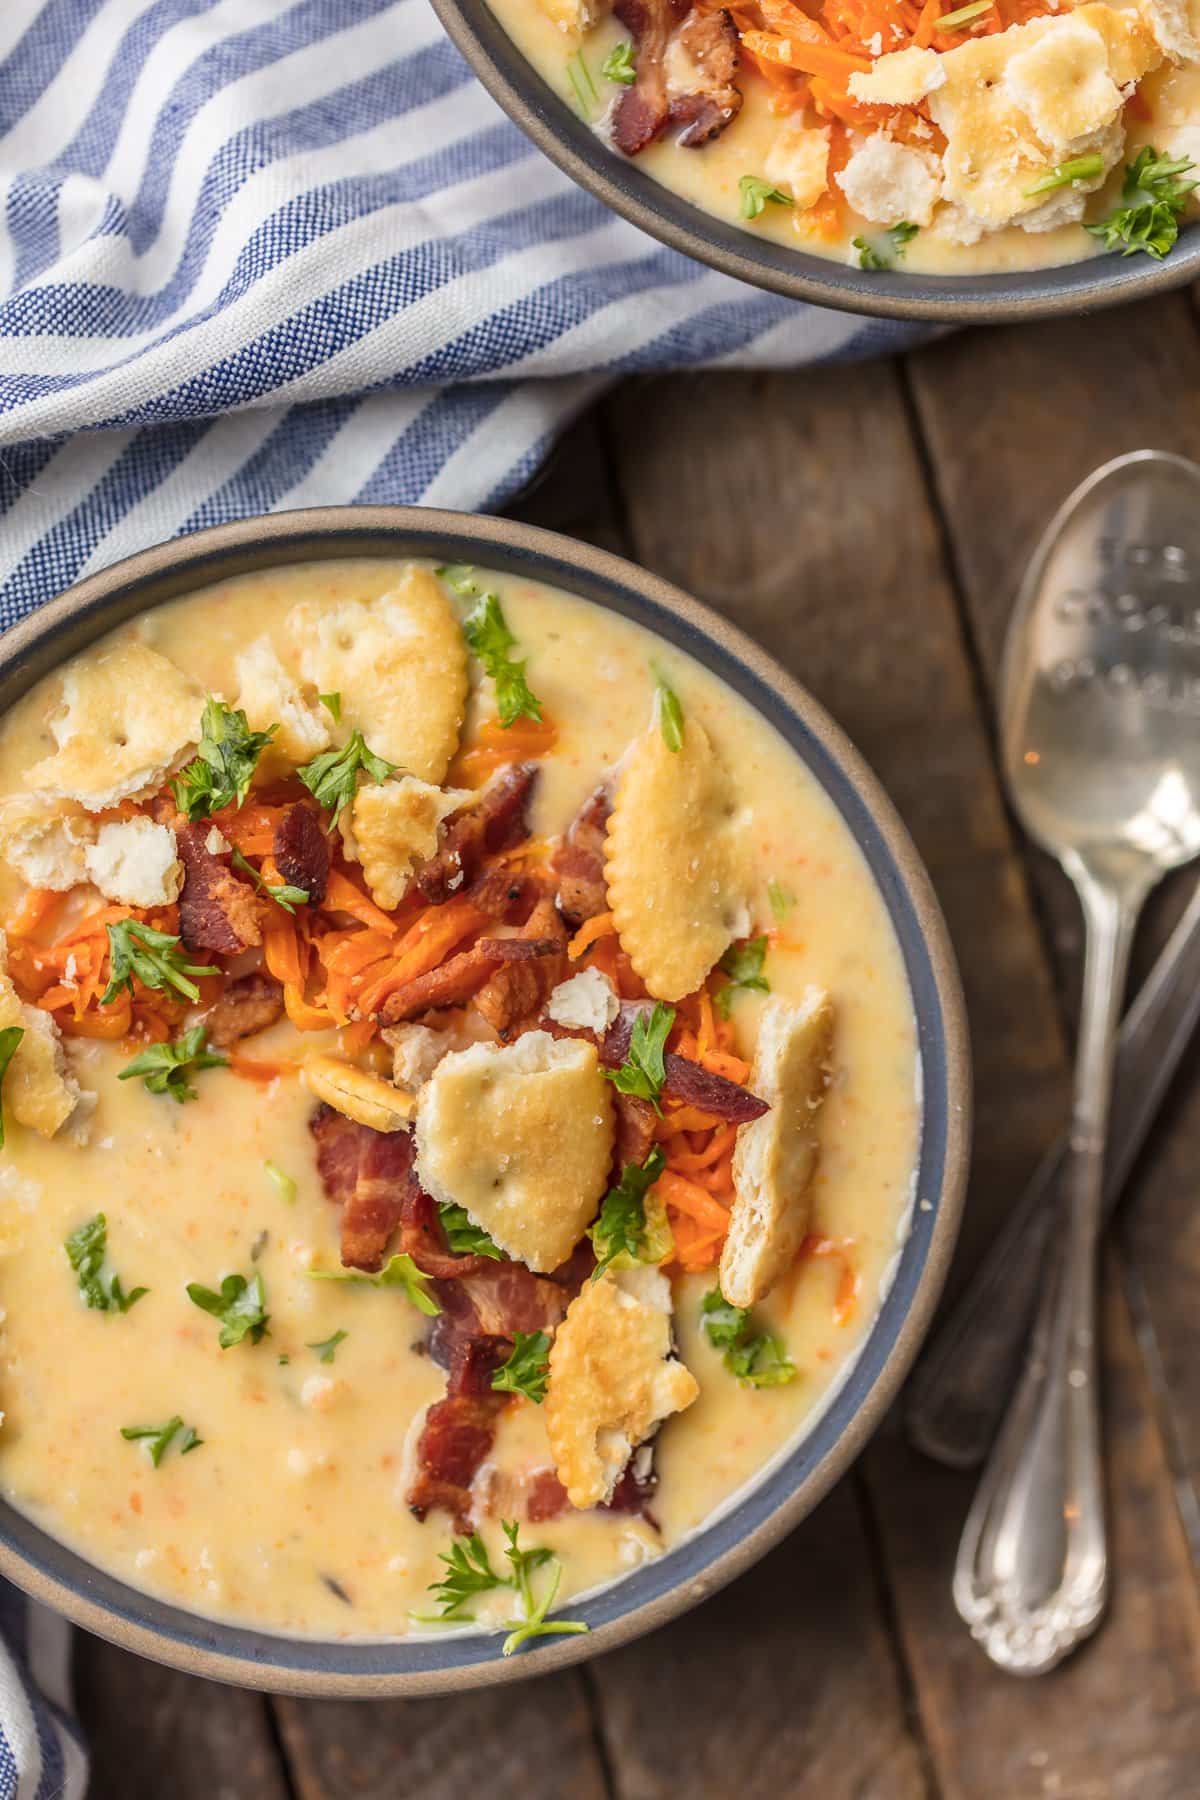 This HASH BROWN POTATO CHEESE SOUP is an absolute Winter MUST MAKE! The ultimate comfort food soup made in minutes. So cheesy and delicious. Topped with sauteed carrots and bacon for extra flavor!